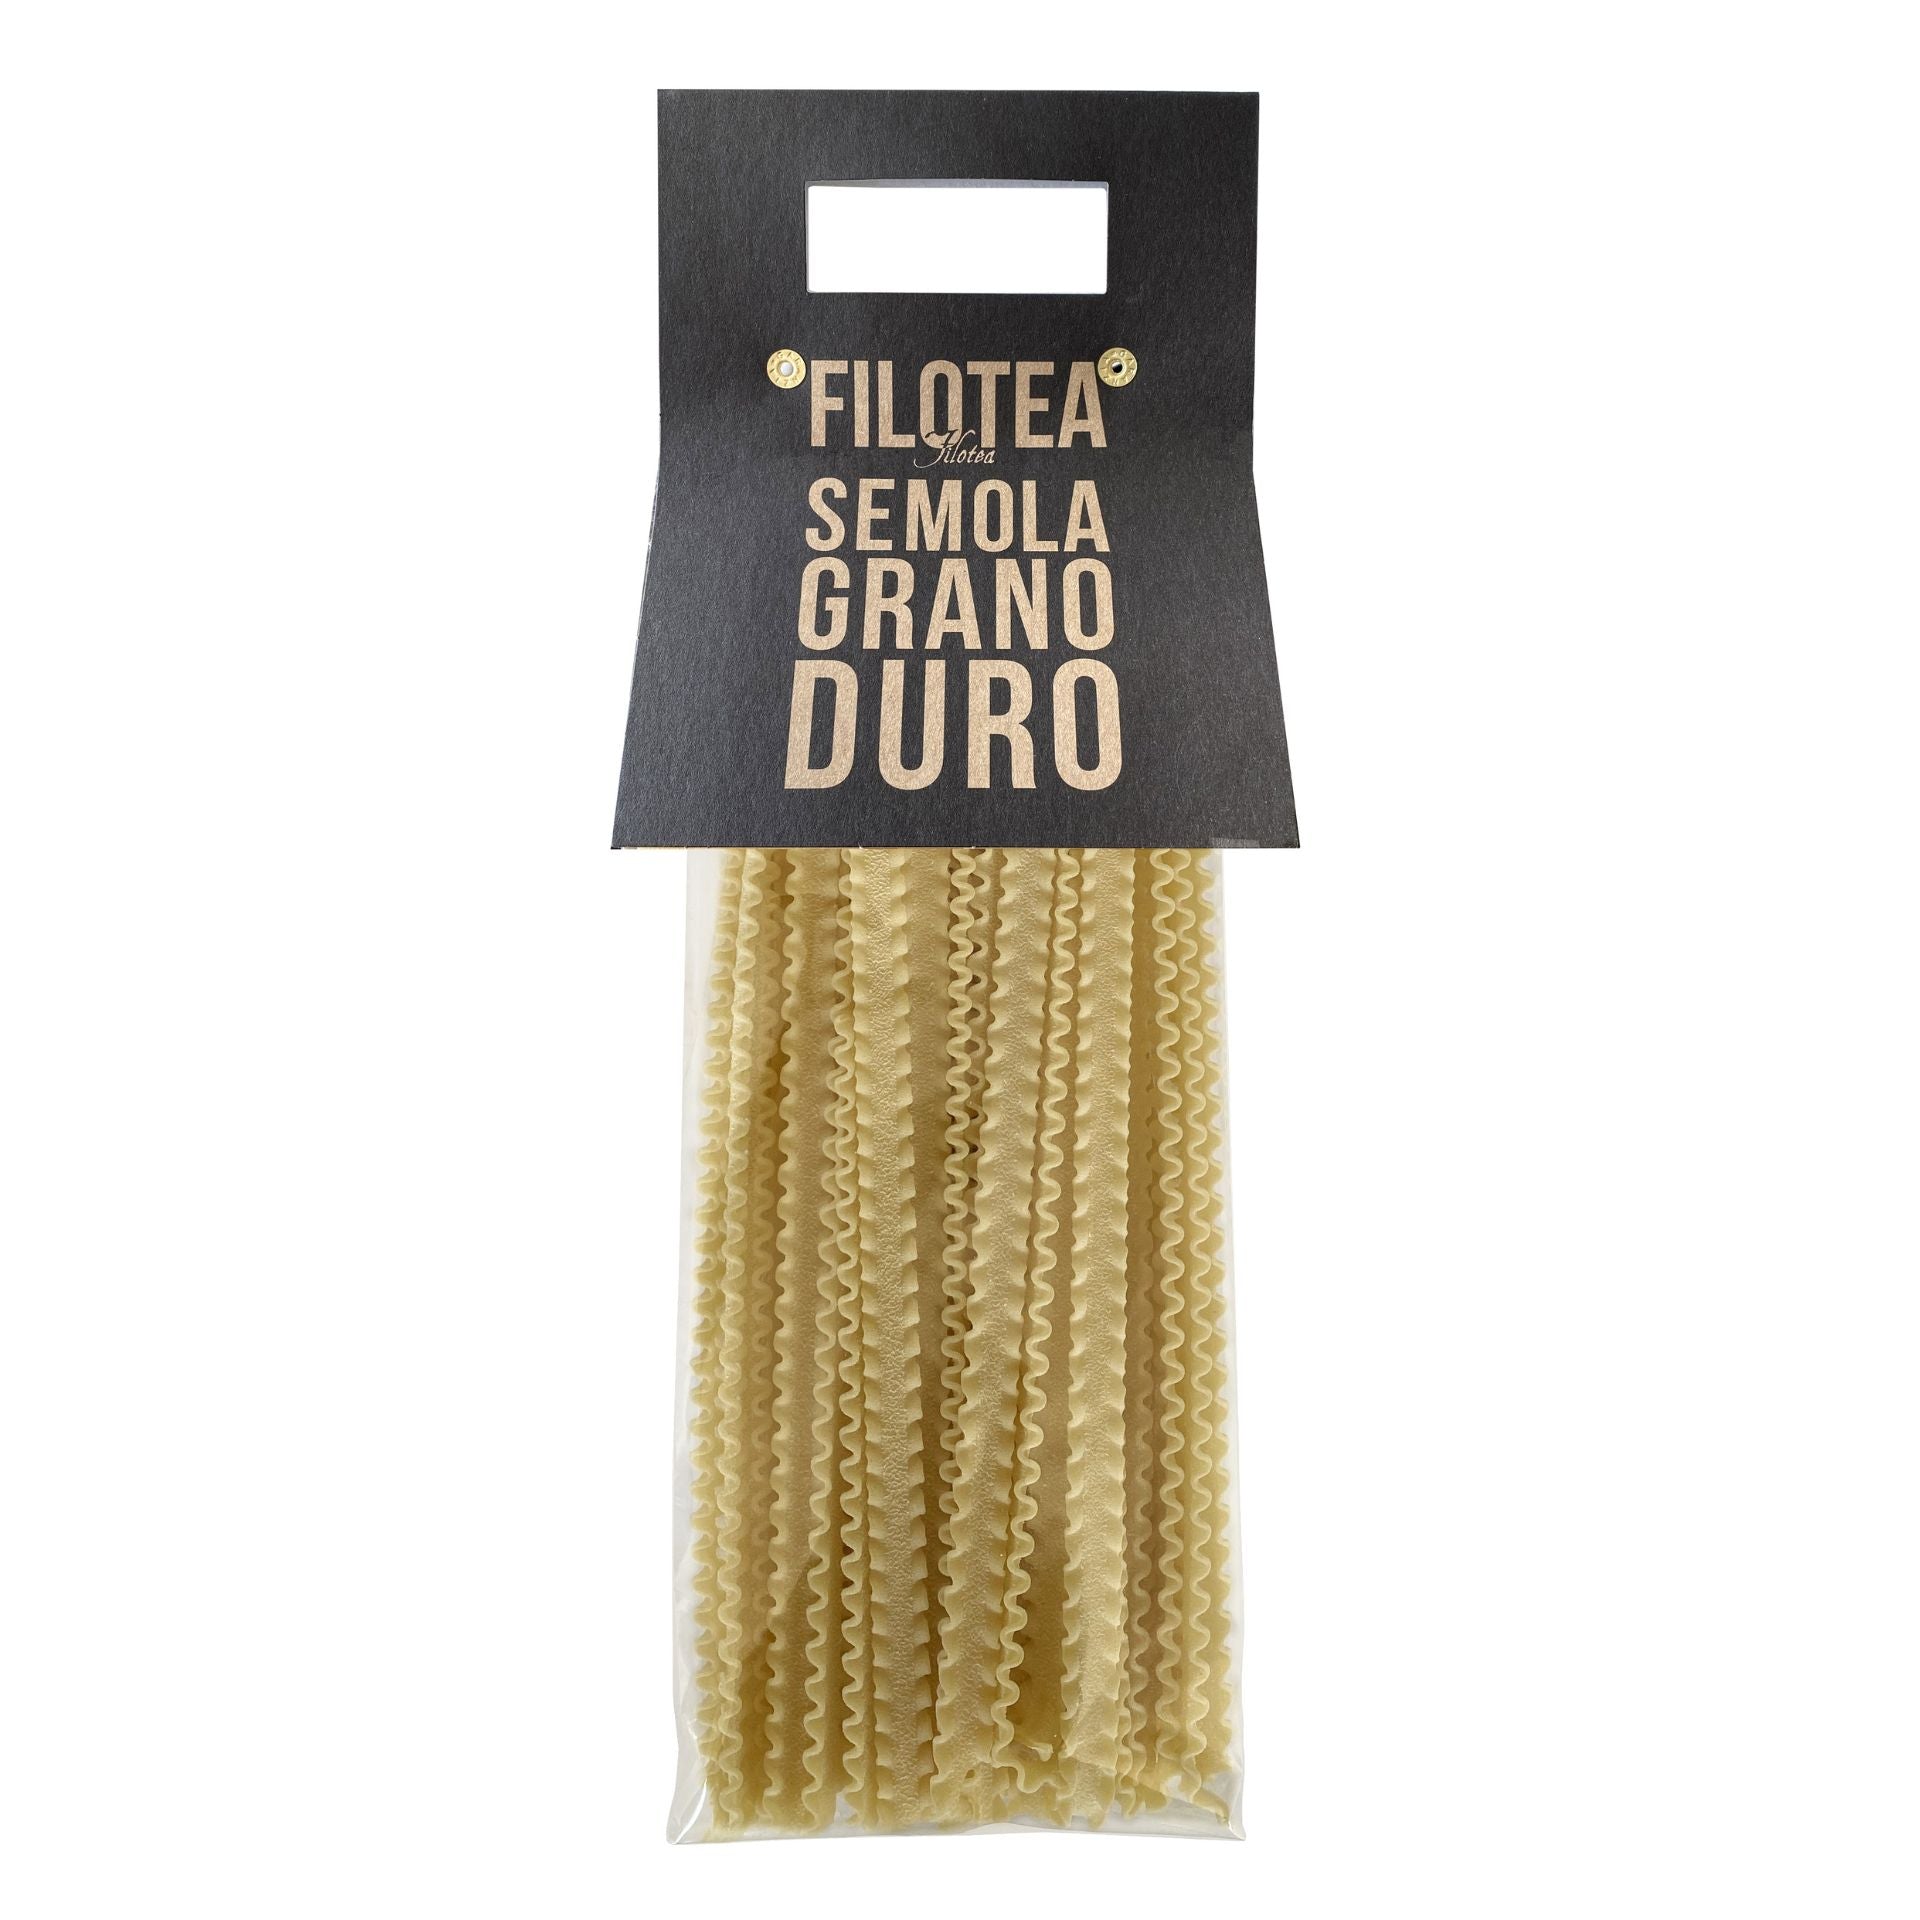 Filotea Reginette Durum Wheat Pasta 500g  | Imported and distributed in the UK by Just Gourmet Foods